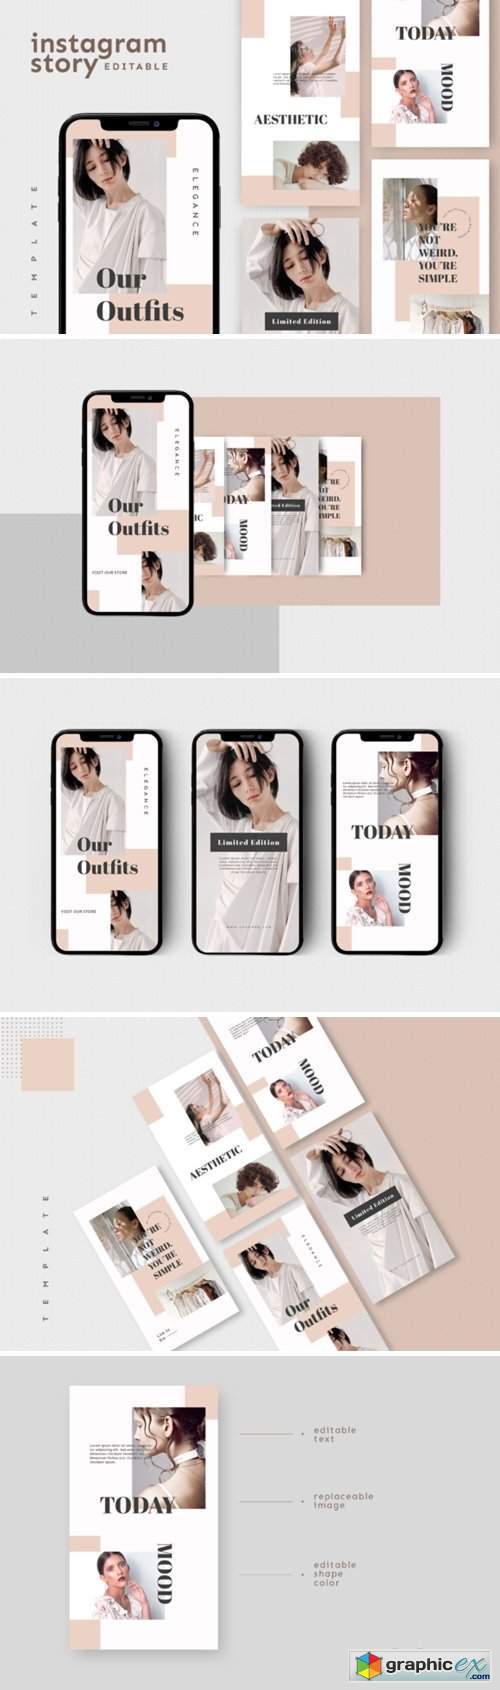 Instagram Story Template 3777602